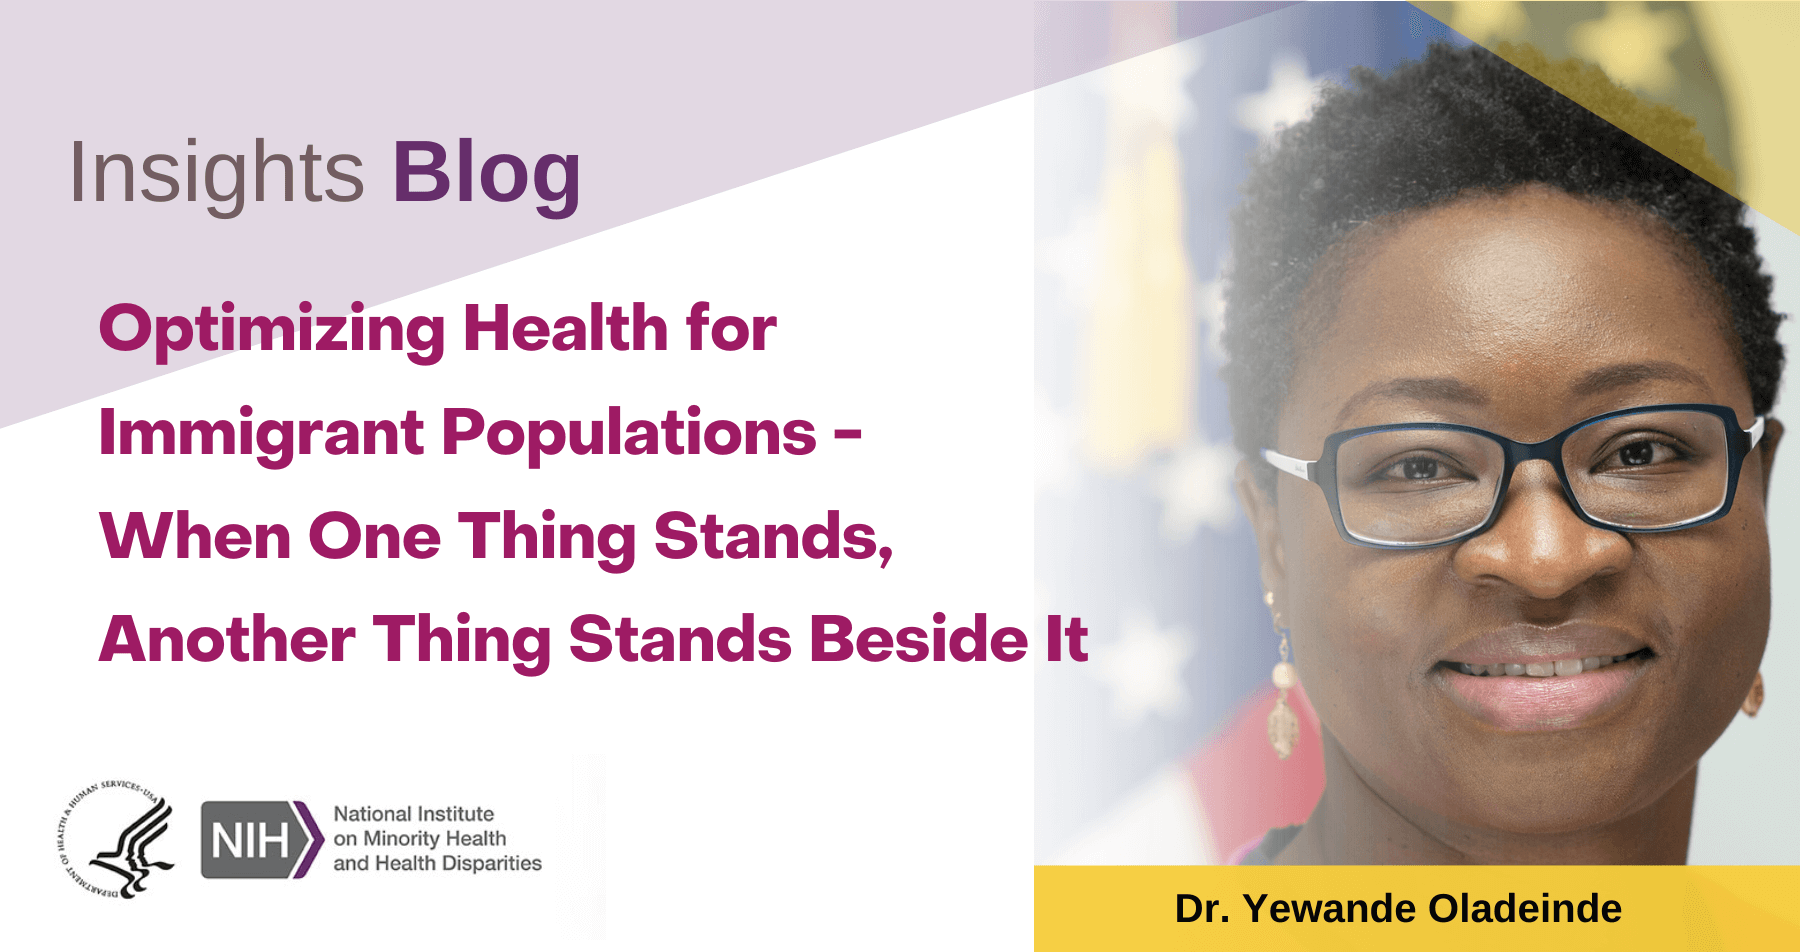 Insights Blog: Optimizing Health for Immigrant Populations, photo of author Dr. Yewande Oladeinde